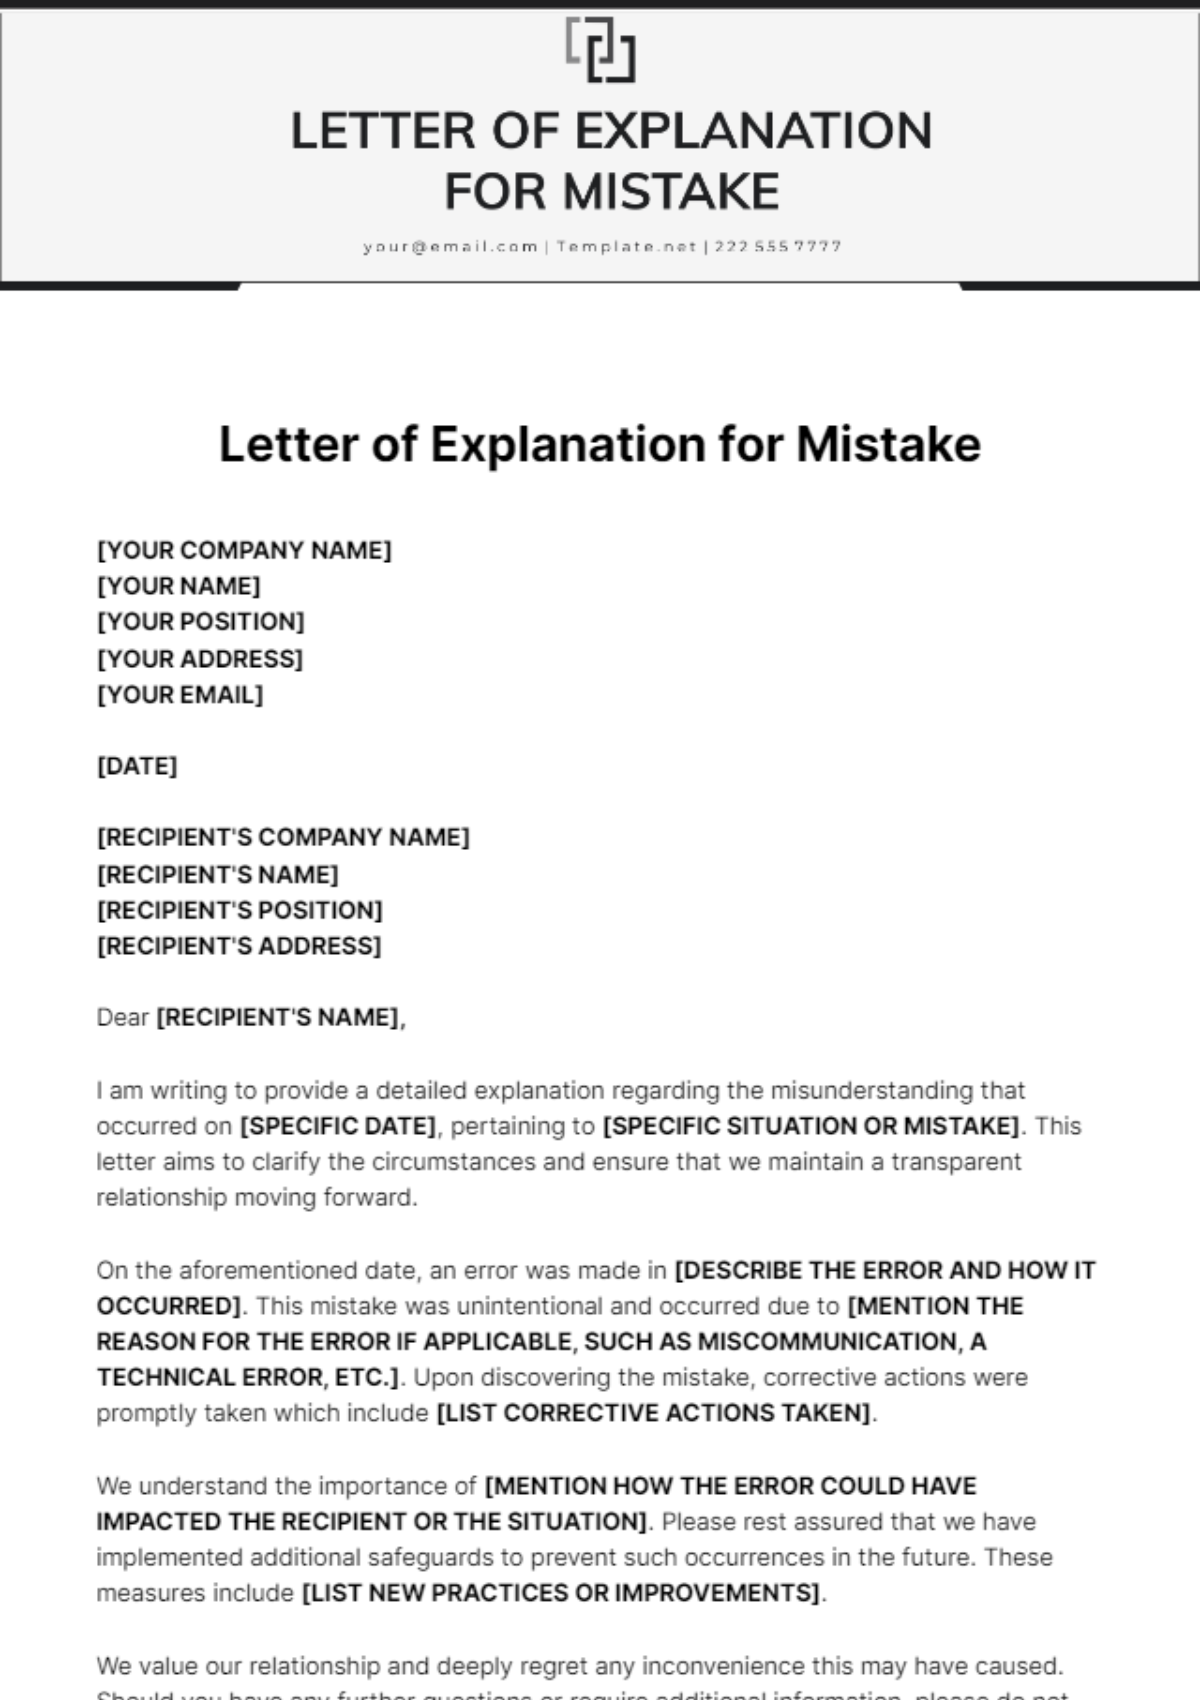 Letter Of Explanation For Mistake Template